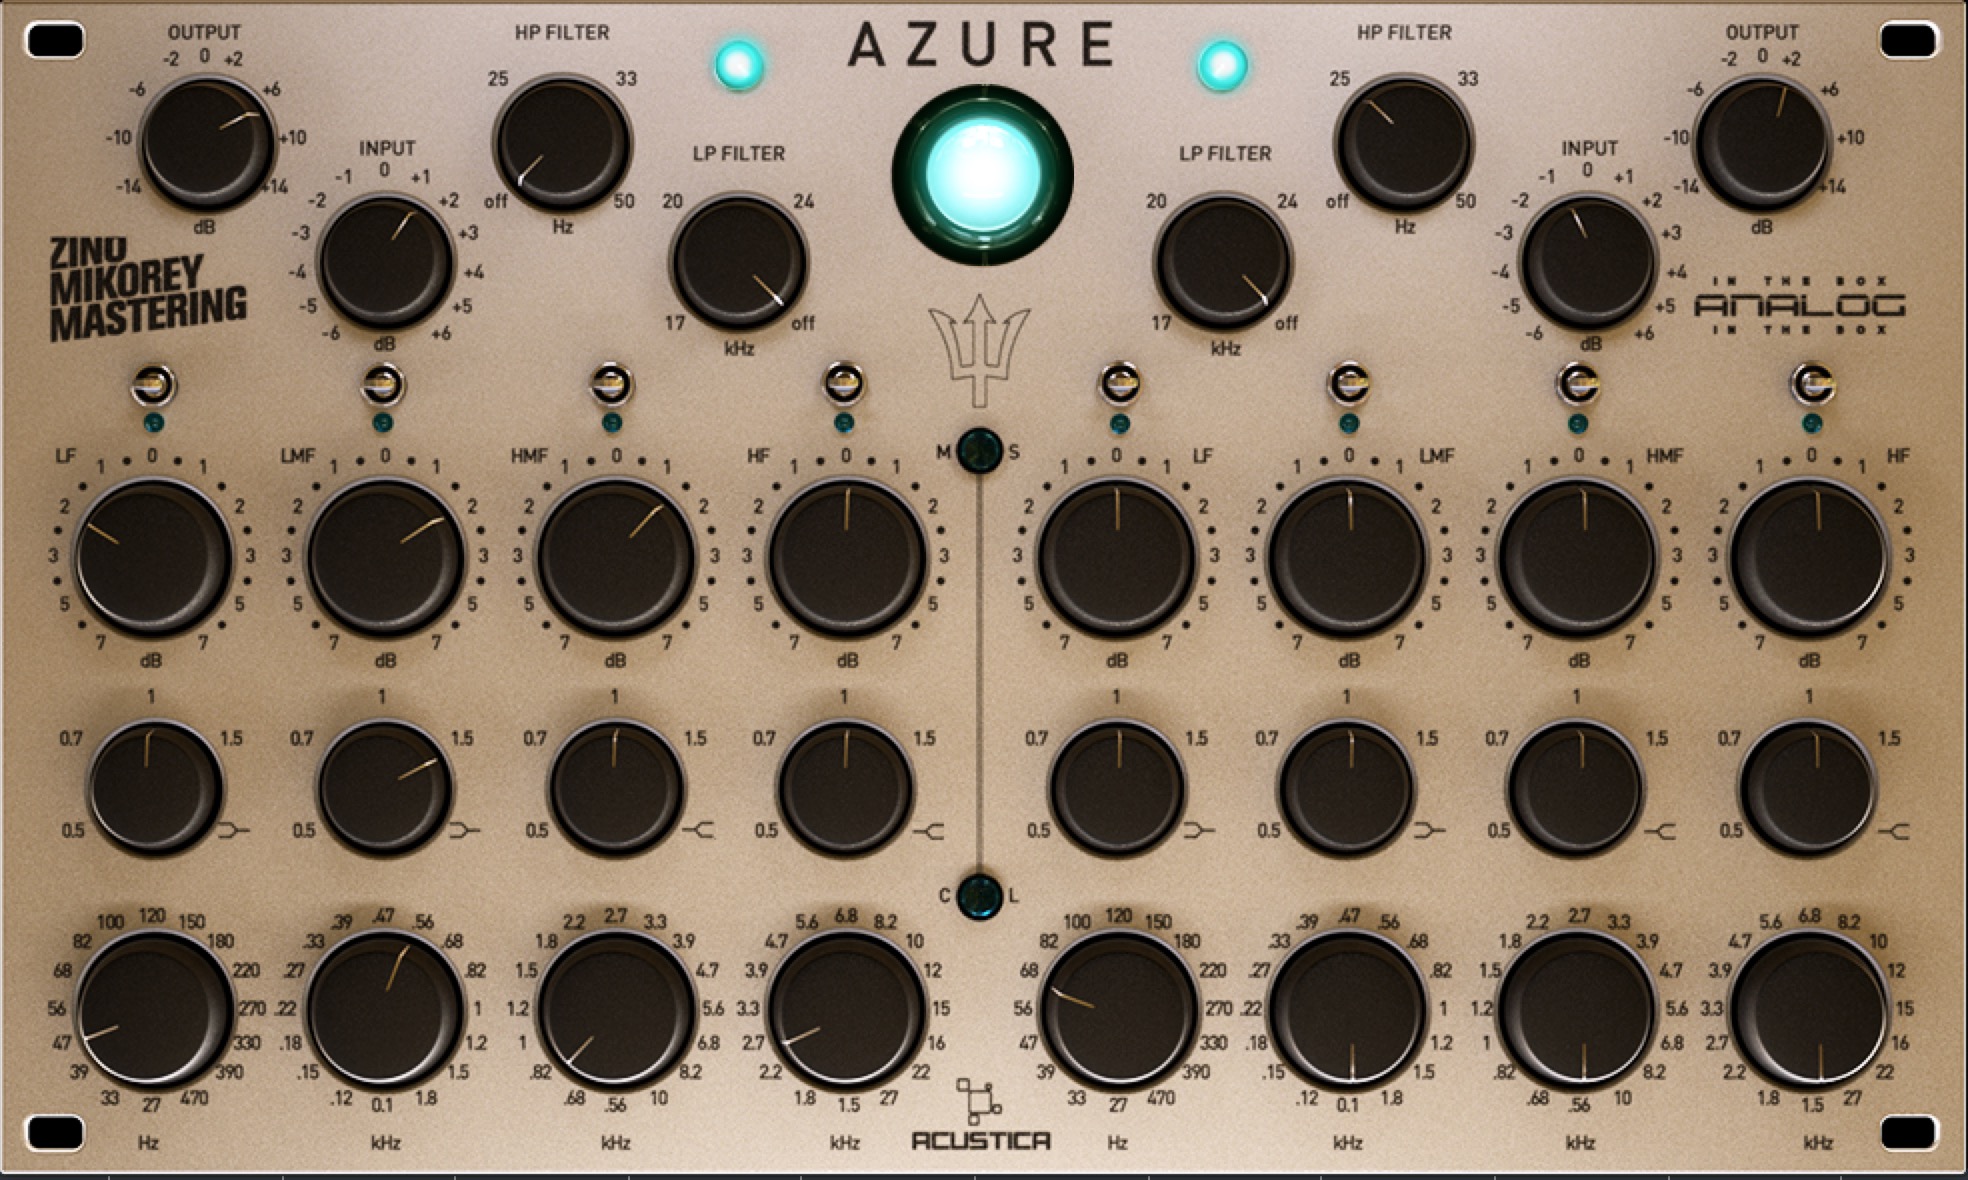 AZURE by Acustica Audio Featured